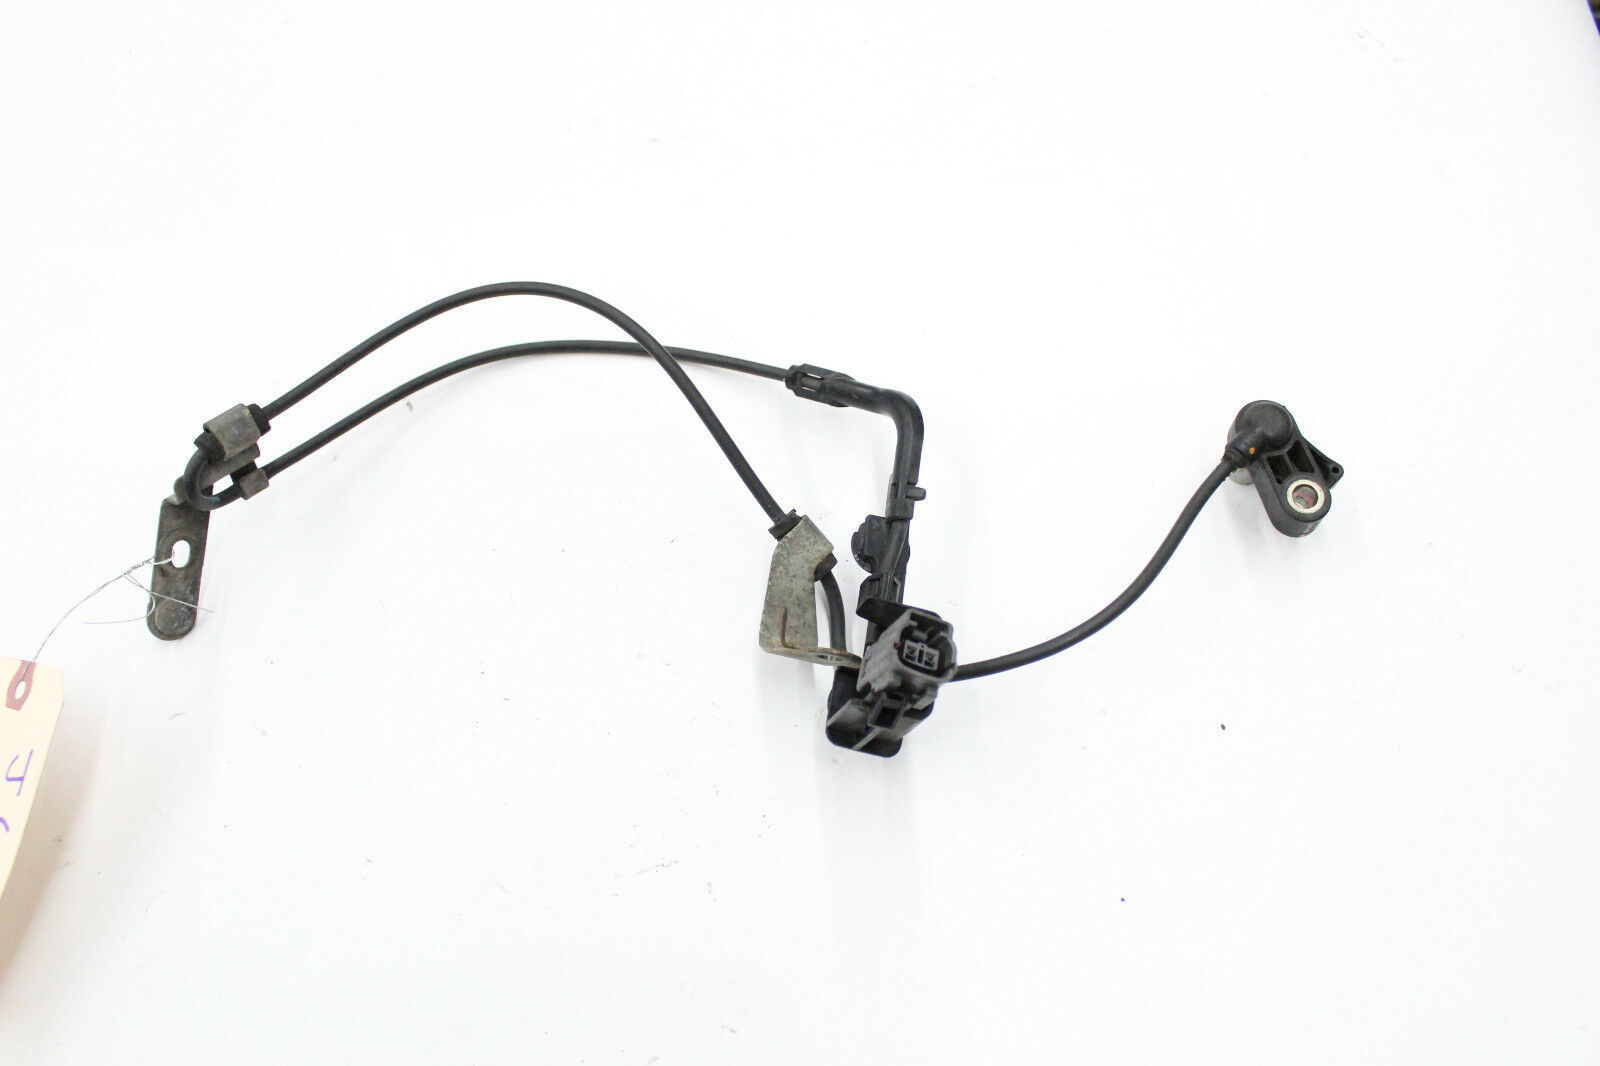 Primary image for 2006-2007 MAZDA MS6 MAZDASPEED 6 ABS WHEEL SPEED SENSOR FRONT DRIVER LEFT J6001